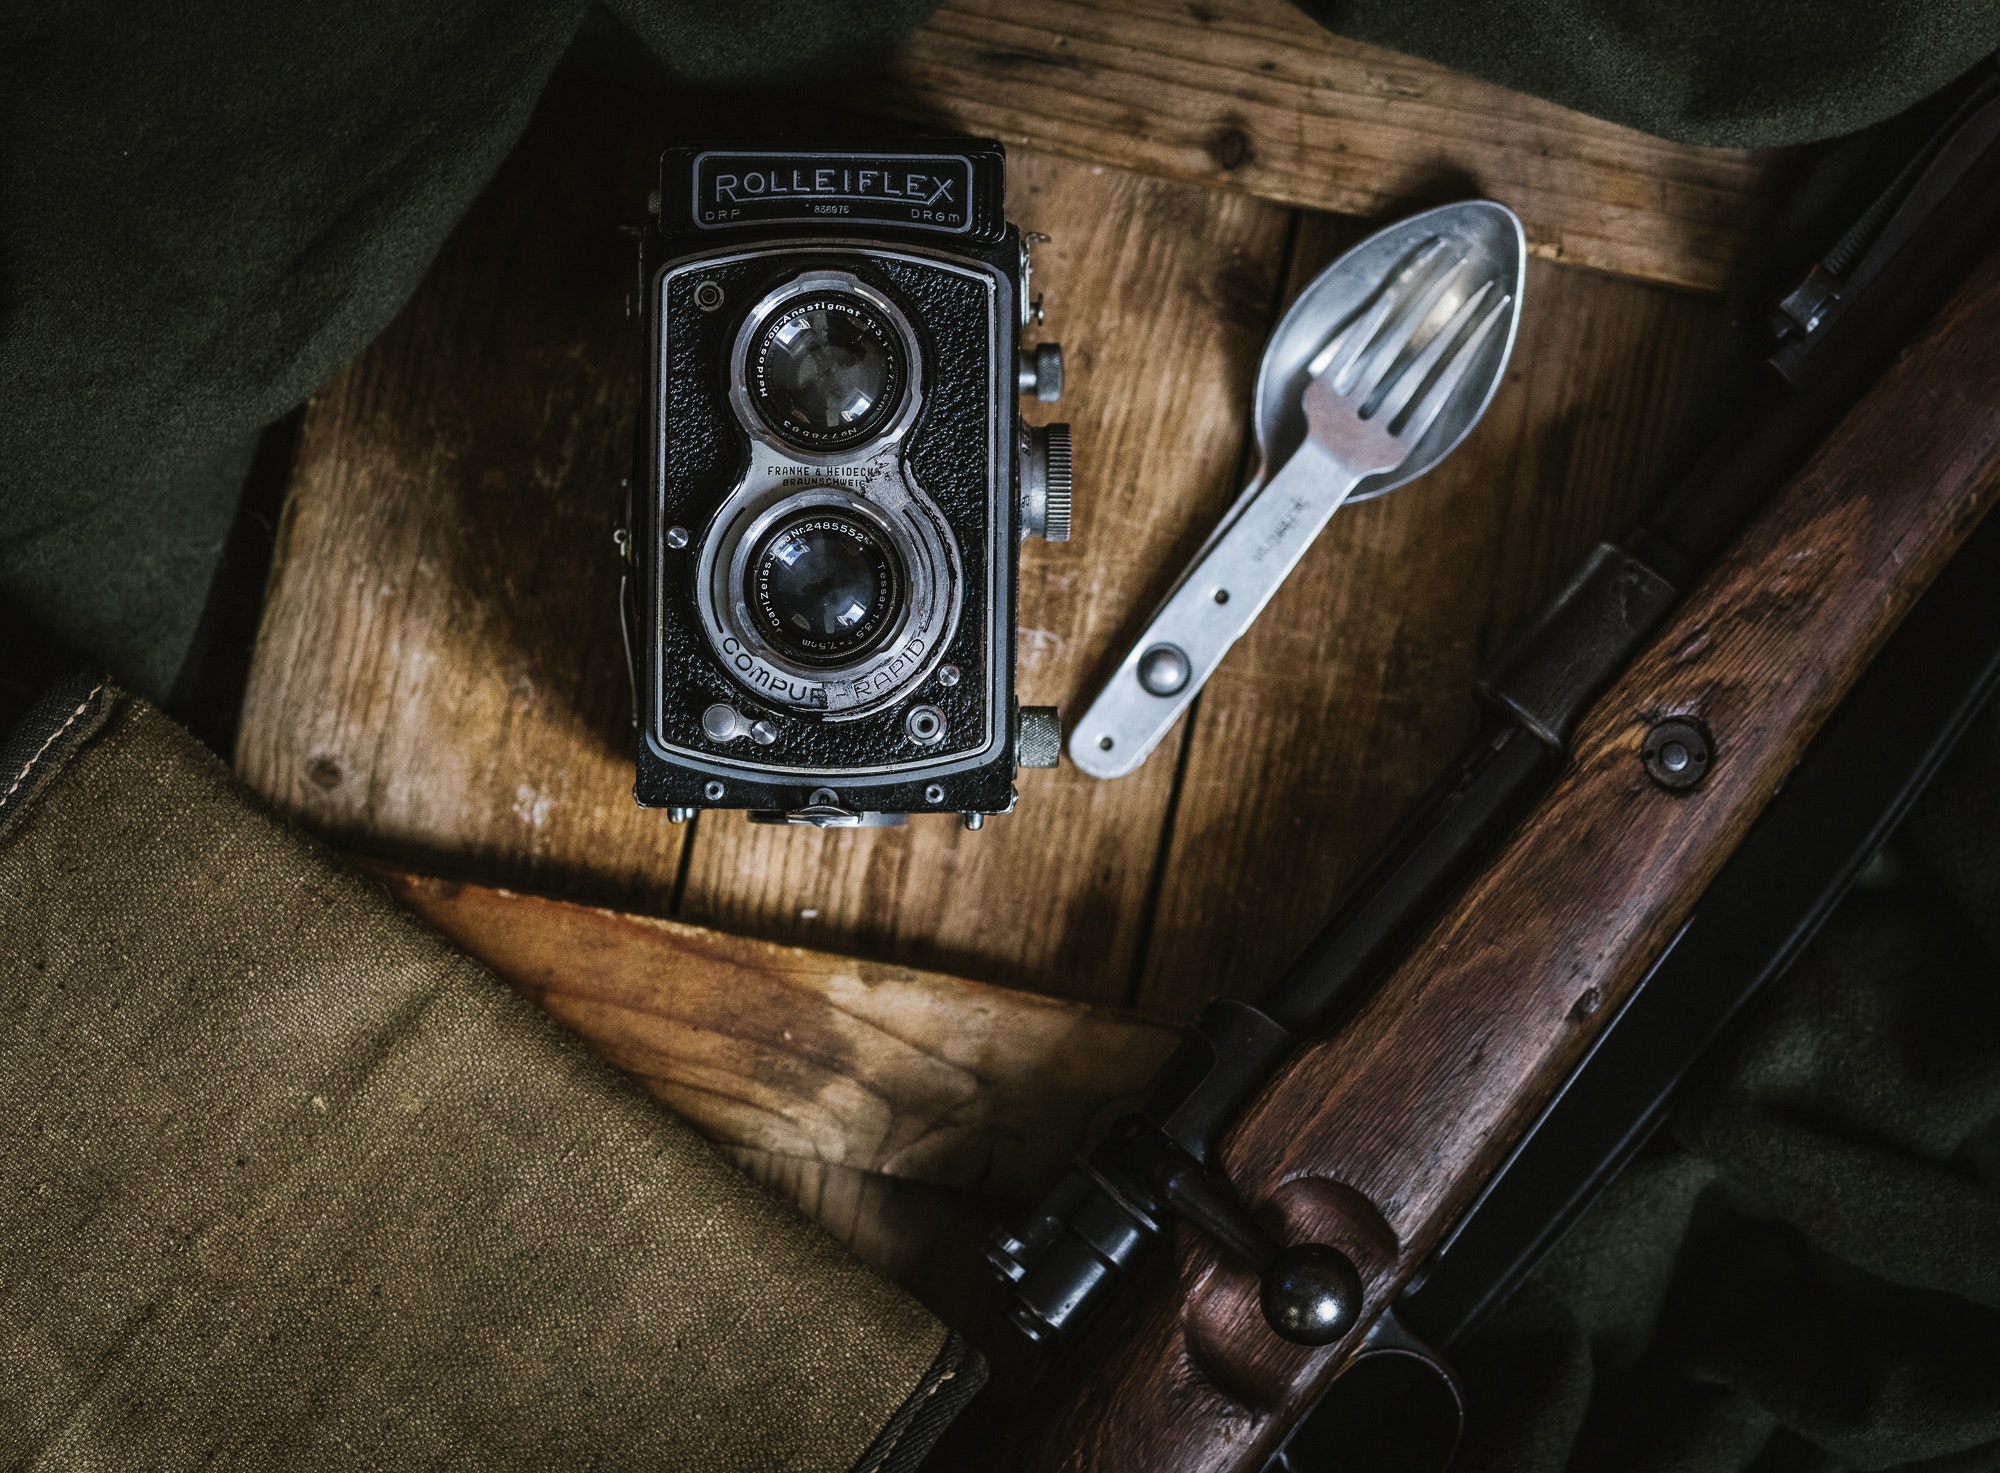 Gray and black rolleiflex camera beside fork and spoon decor photo